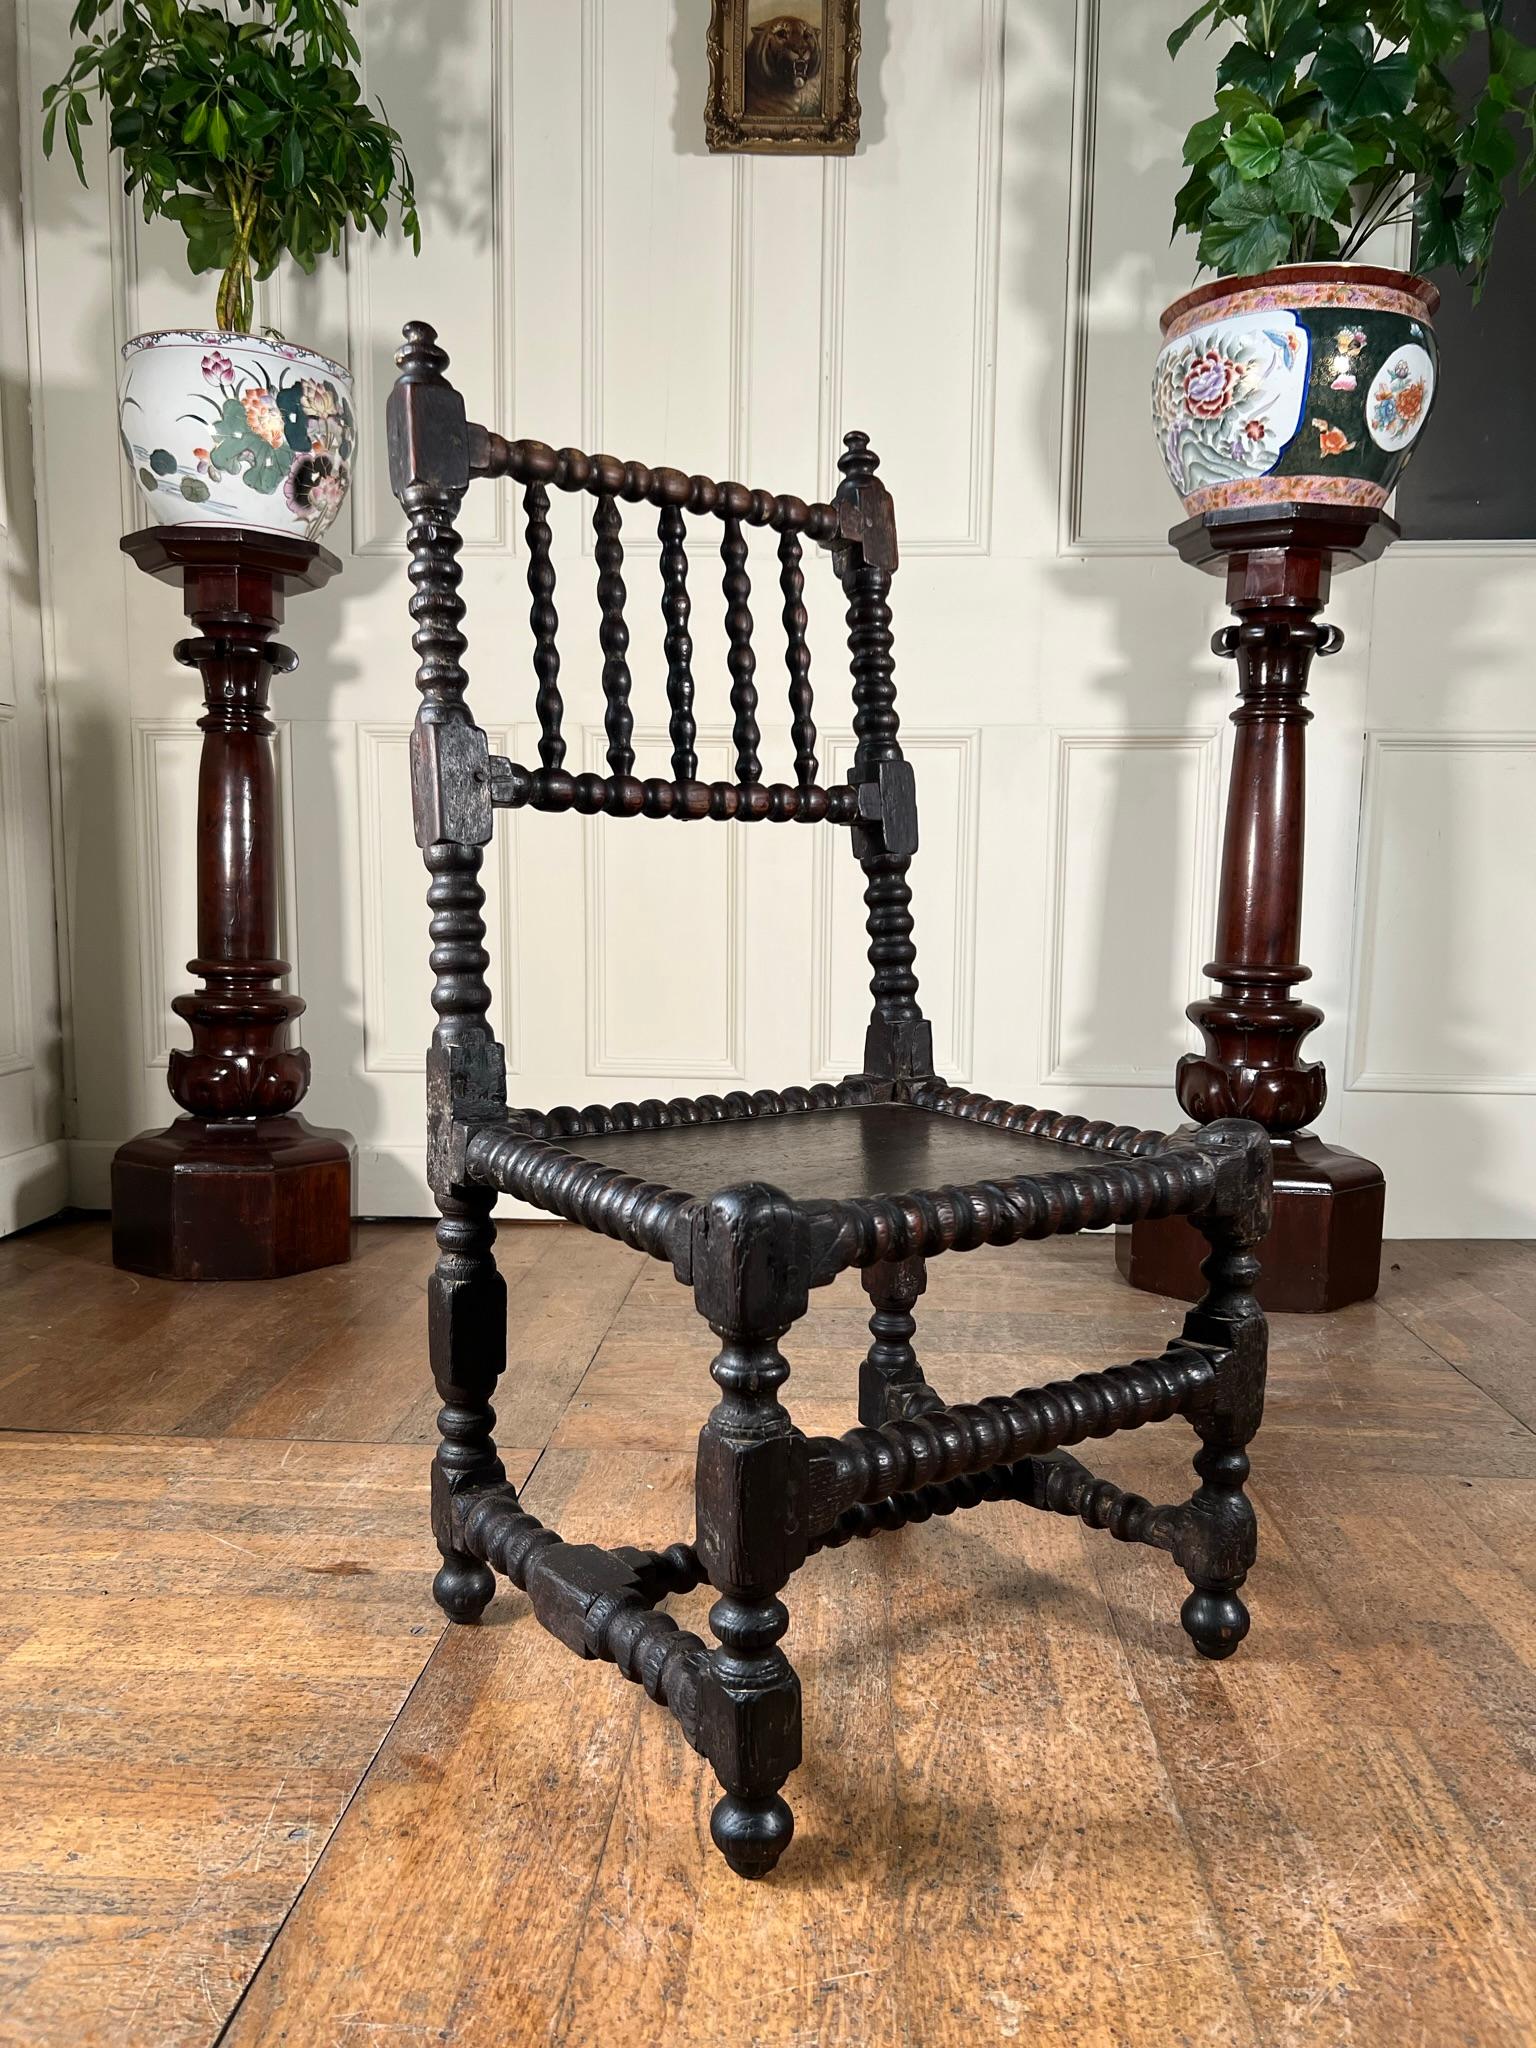 Rare surviving walnut turned joined bobbin backstool chair in original condition with fantastic wear.

Plank seat dated verso 1684.

Measurements: 95cm h x 46cm w x 40 cm d (37cm h seat height)